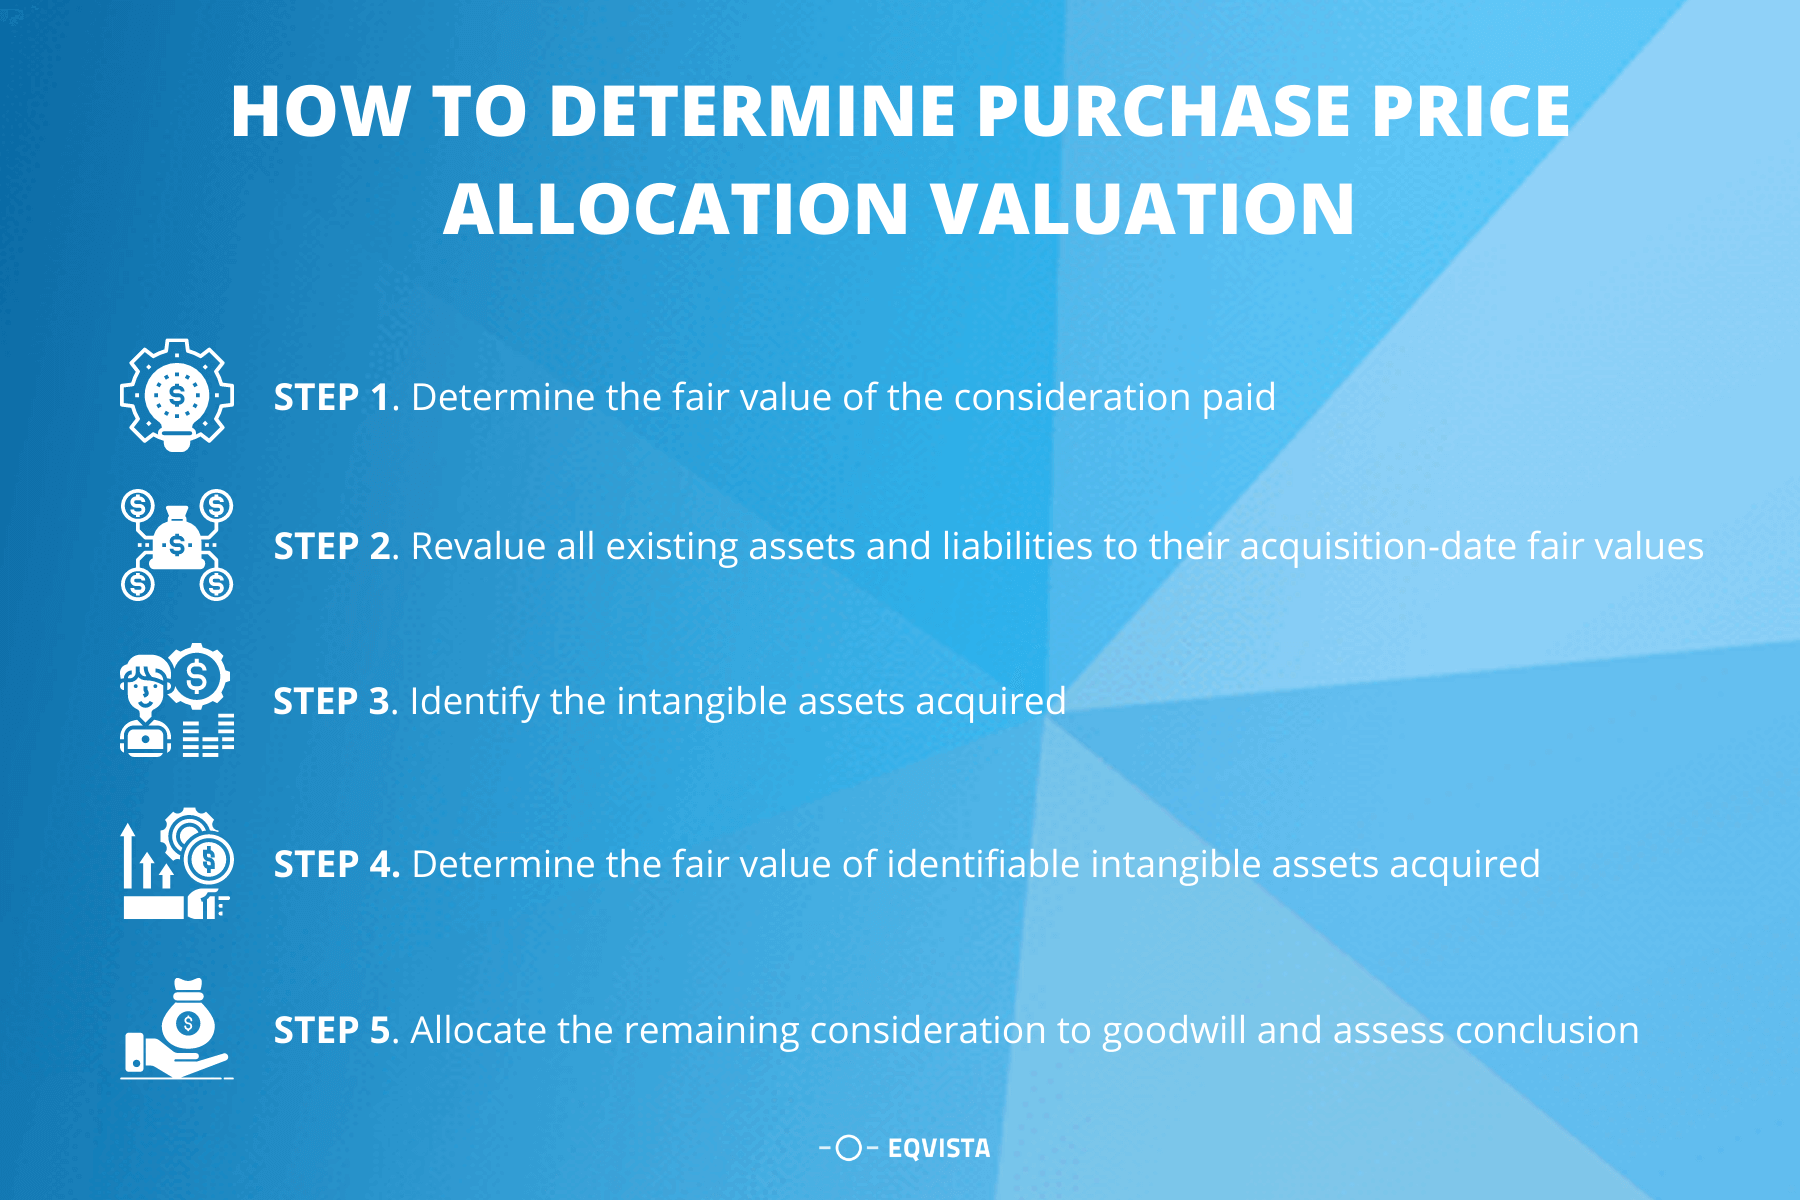 How to determine purchase price allocation valuation?